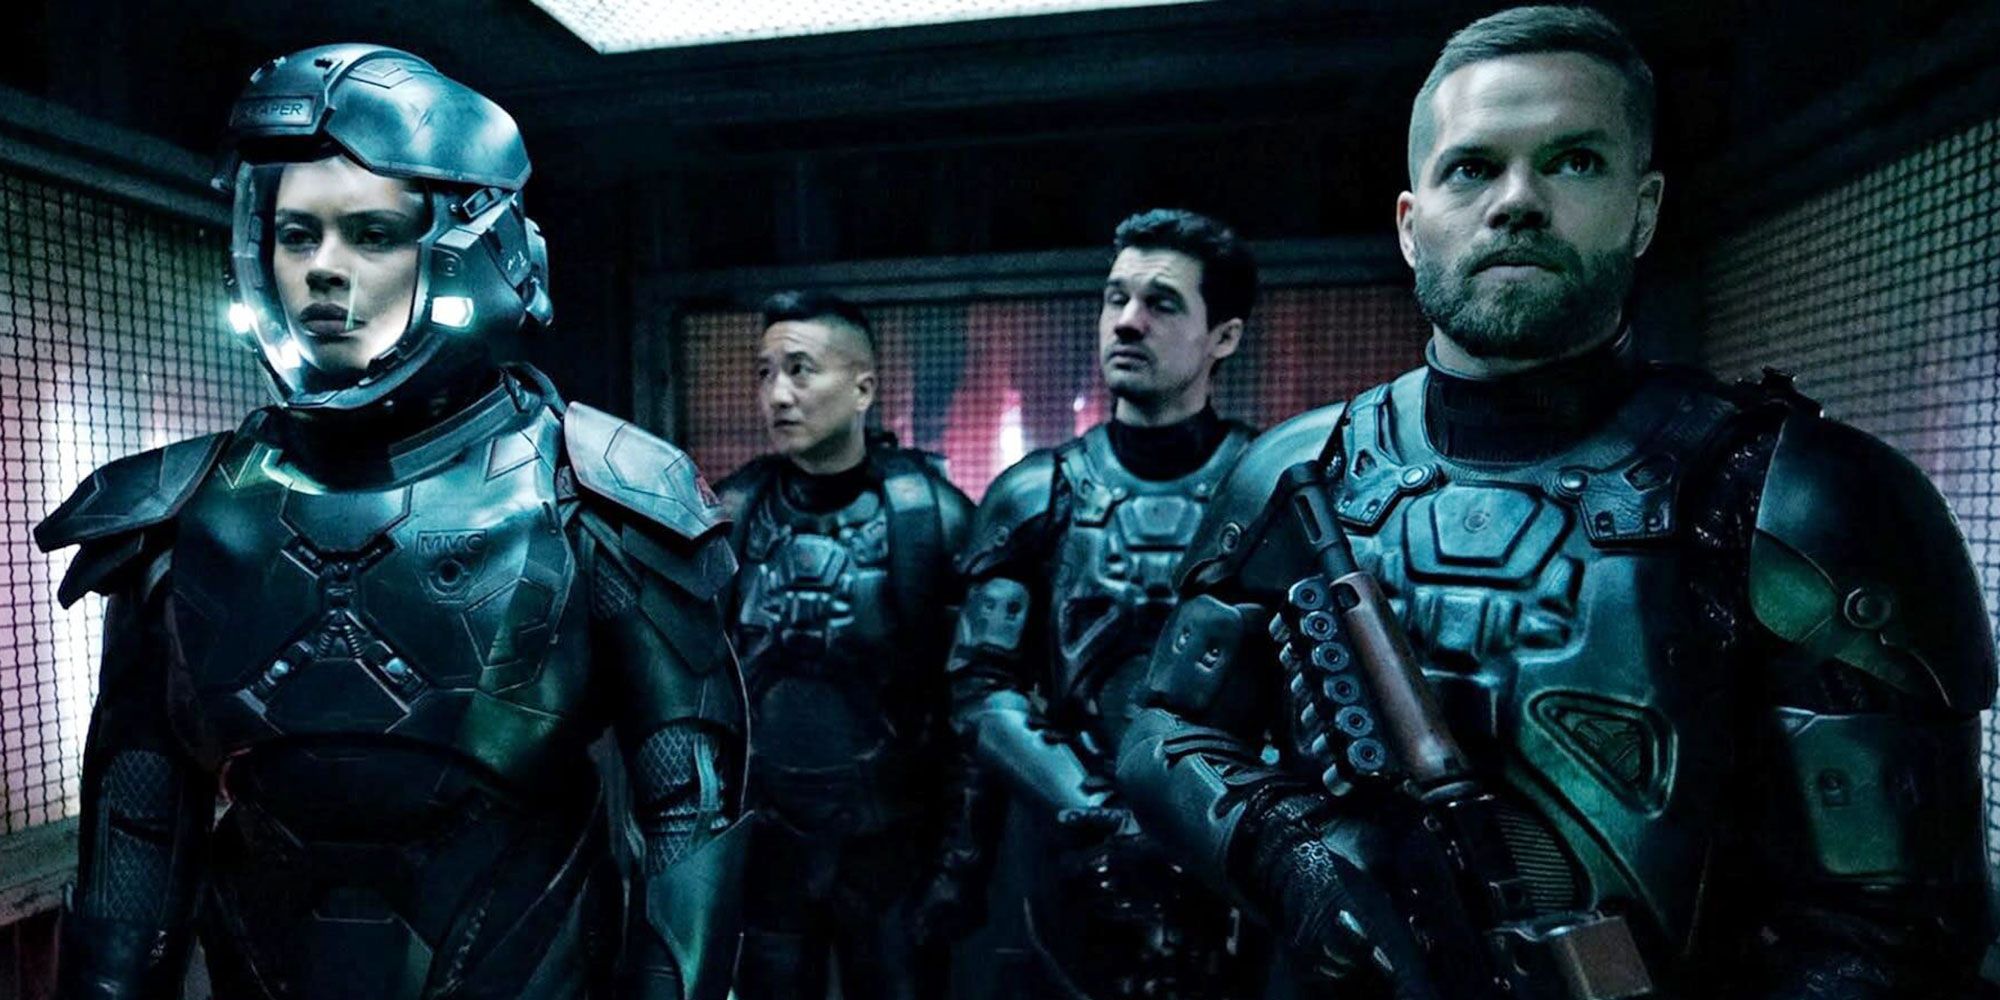 The Expanse's characters in combat suits.